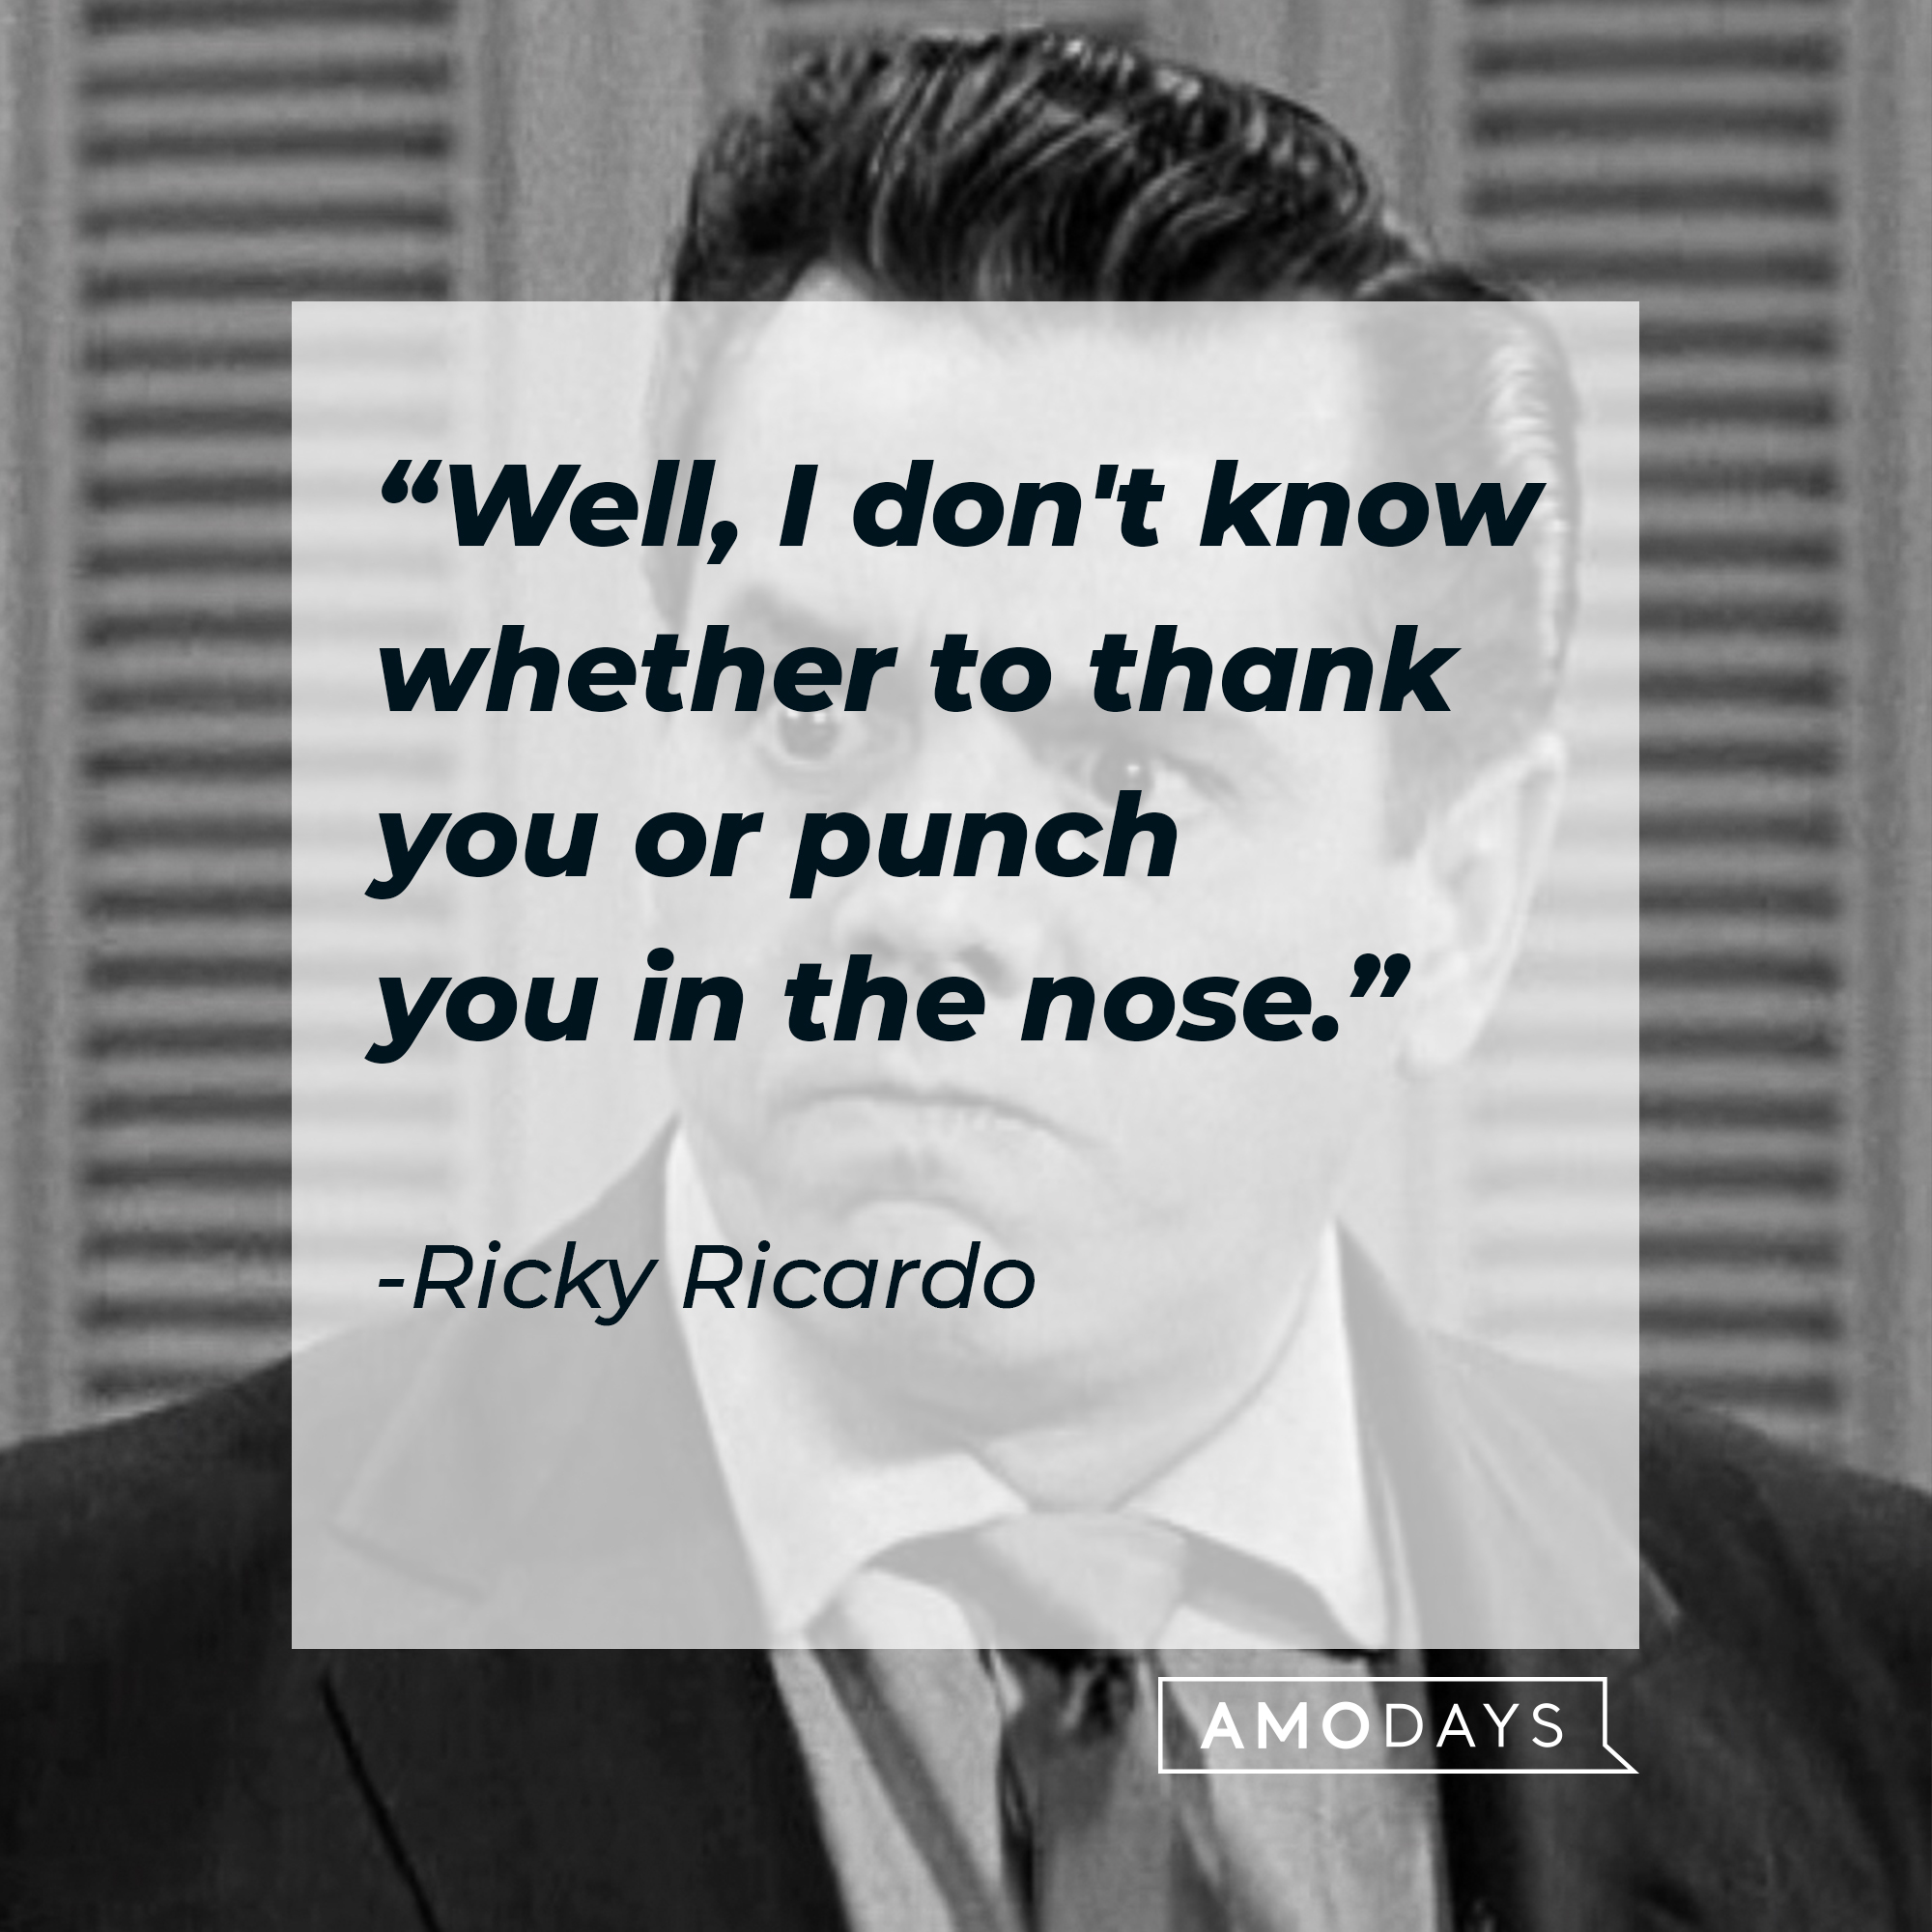 Ricky Ricardo's quote: "Well, I don't know whether to thank you or punch you in the nose." | Source: Getty Images